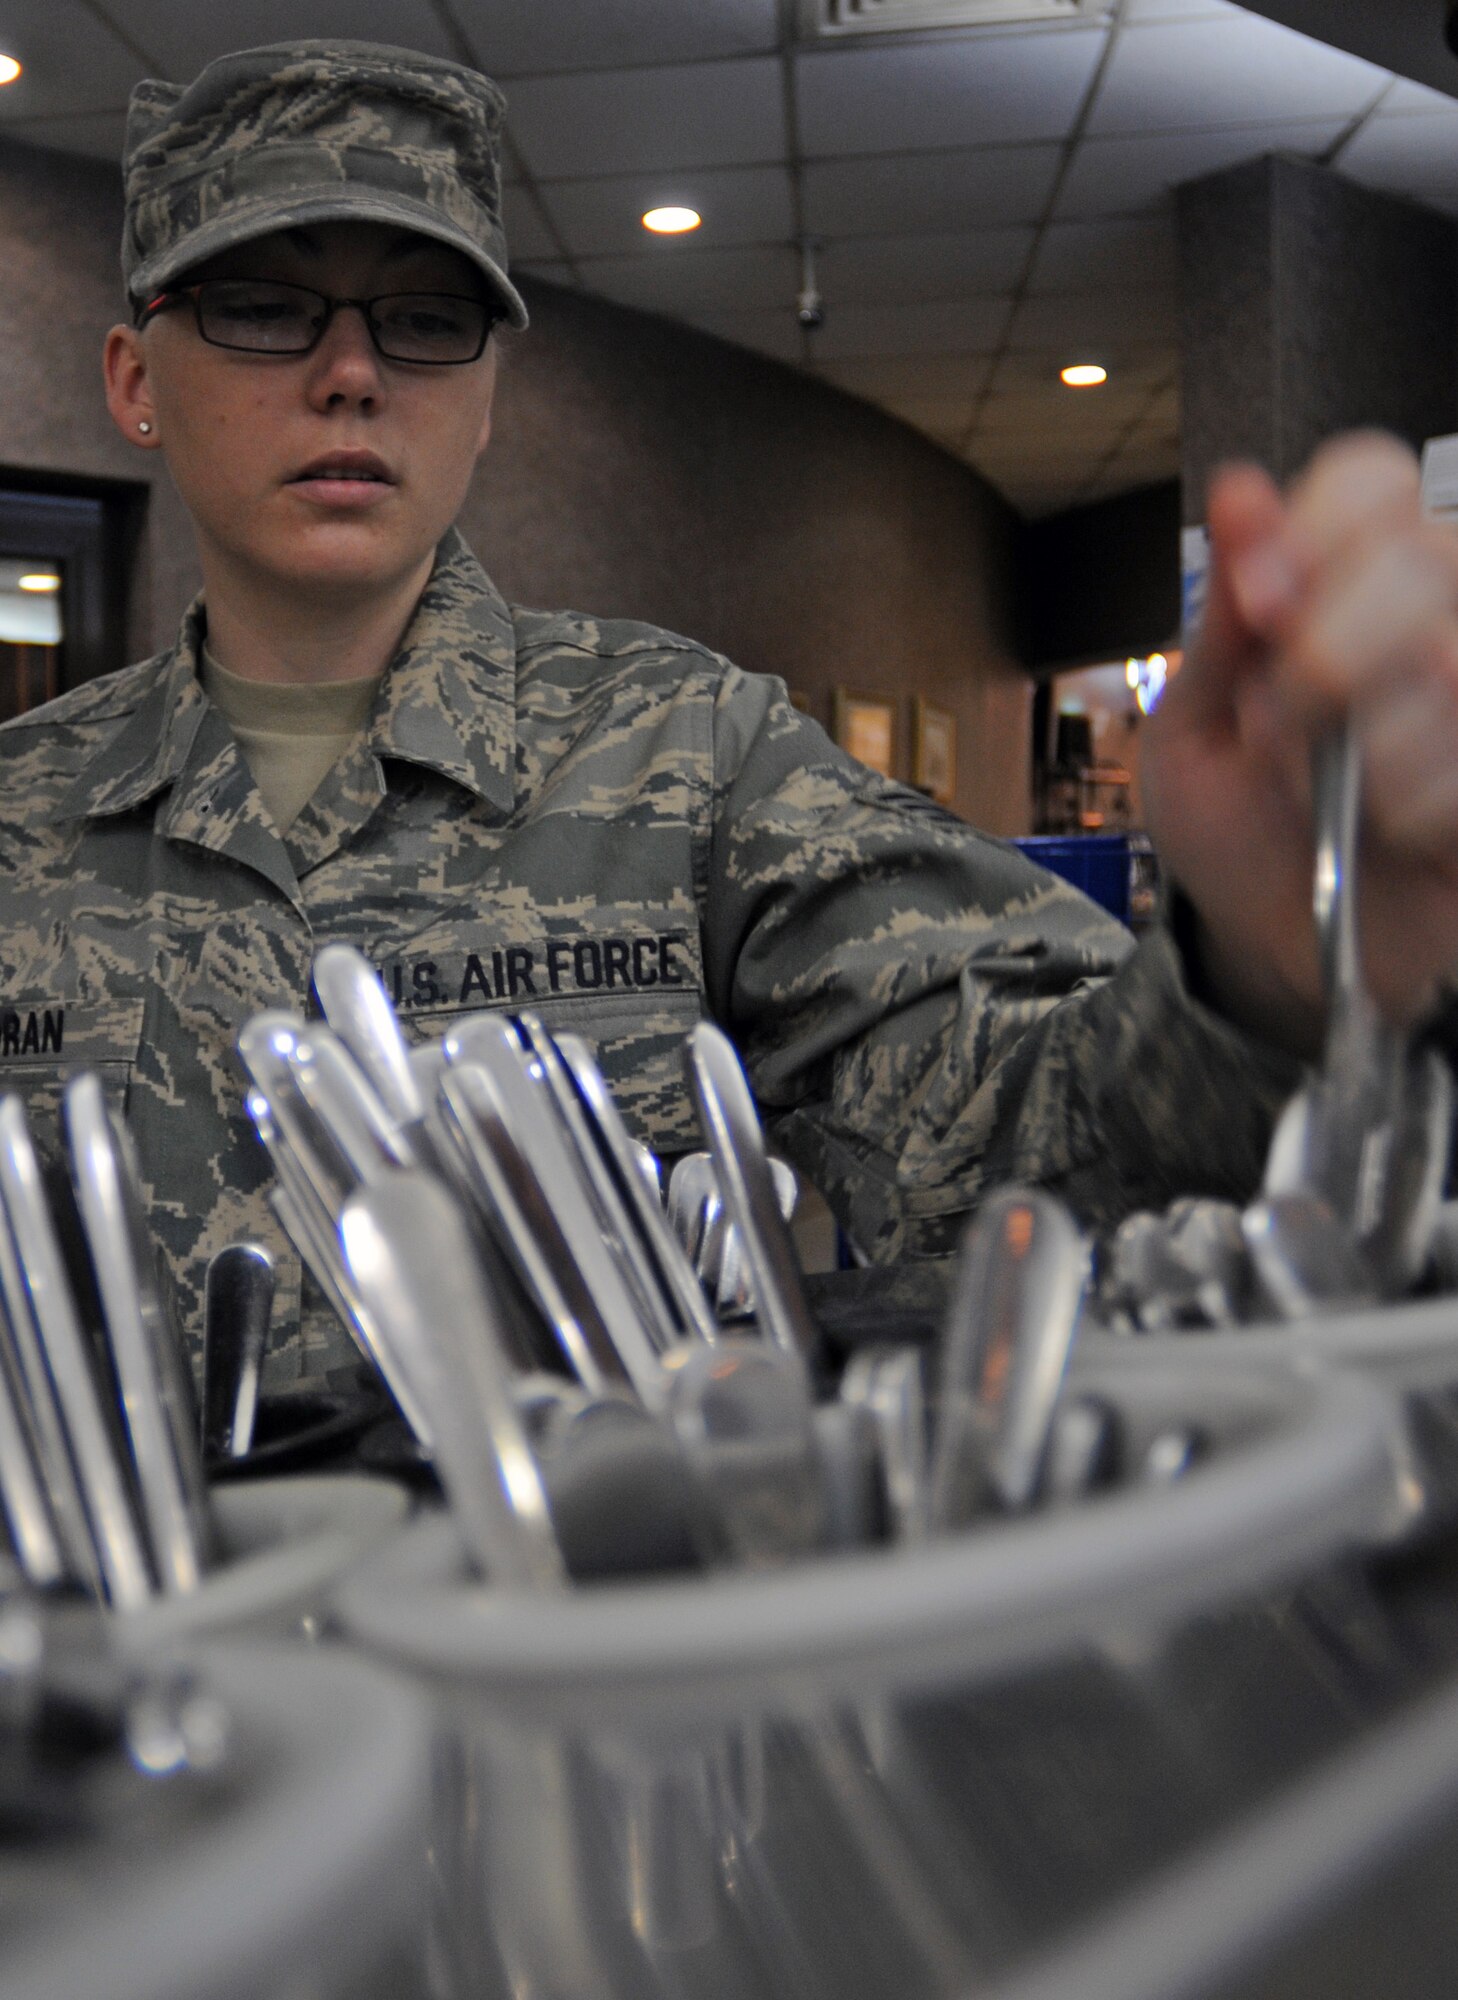 Senior Airman Christina Moran, 39th Medical Group Public Health technician, inspects silverware to ensure cleanliness inside the Sultan’s Inn at Incirlik Air Base, Turkey. Public Health has an array of responsibilities when it comes to keeping the base healthy including inspecting all facilities that serve food on base, ensuring the readiness of deploying Airmen and educating the public about safe sex. (U.S. Air Force photo/Senior Airman Sara Csurilla)